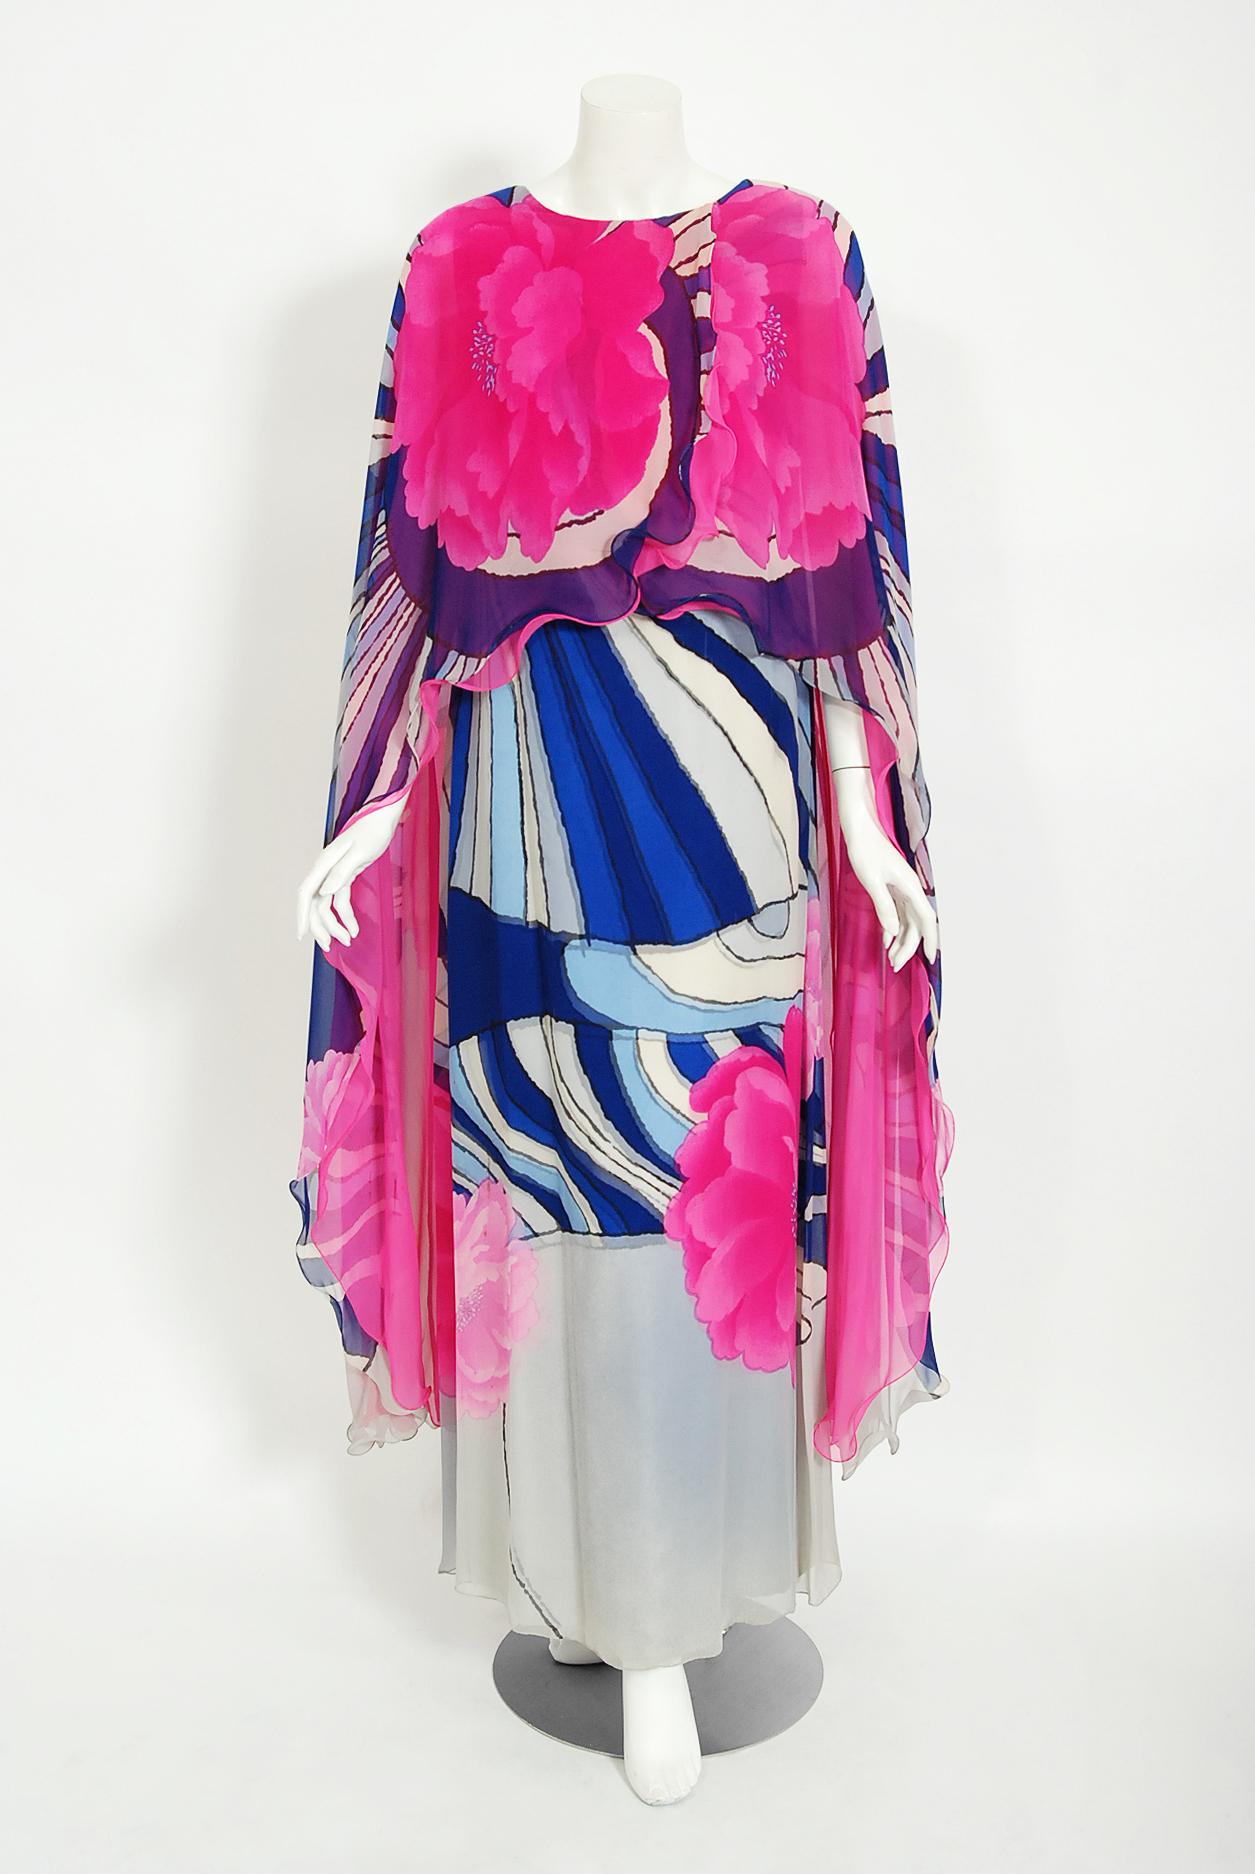 An iconic and instantly recognizable Hane Mori couture caftan gown dating back to her 1969-70 collection. Whilst on a Paris holiday in 1960, Mori had a fateful fitting with Coco Chanel. She claimed this meeting changed her life and she challenged